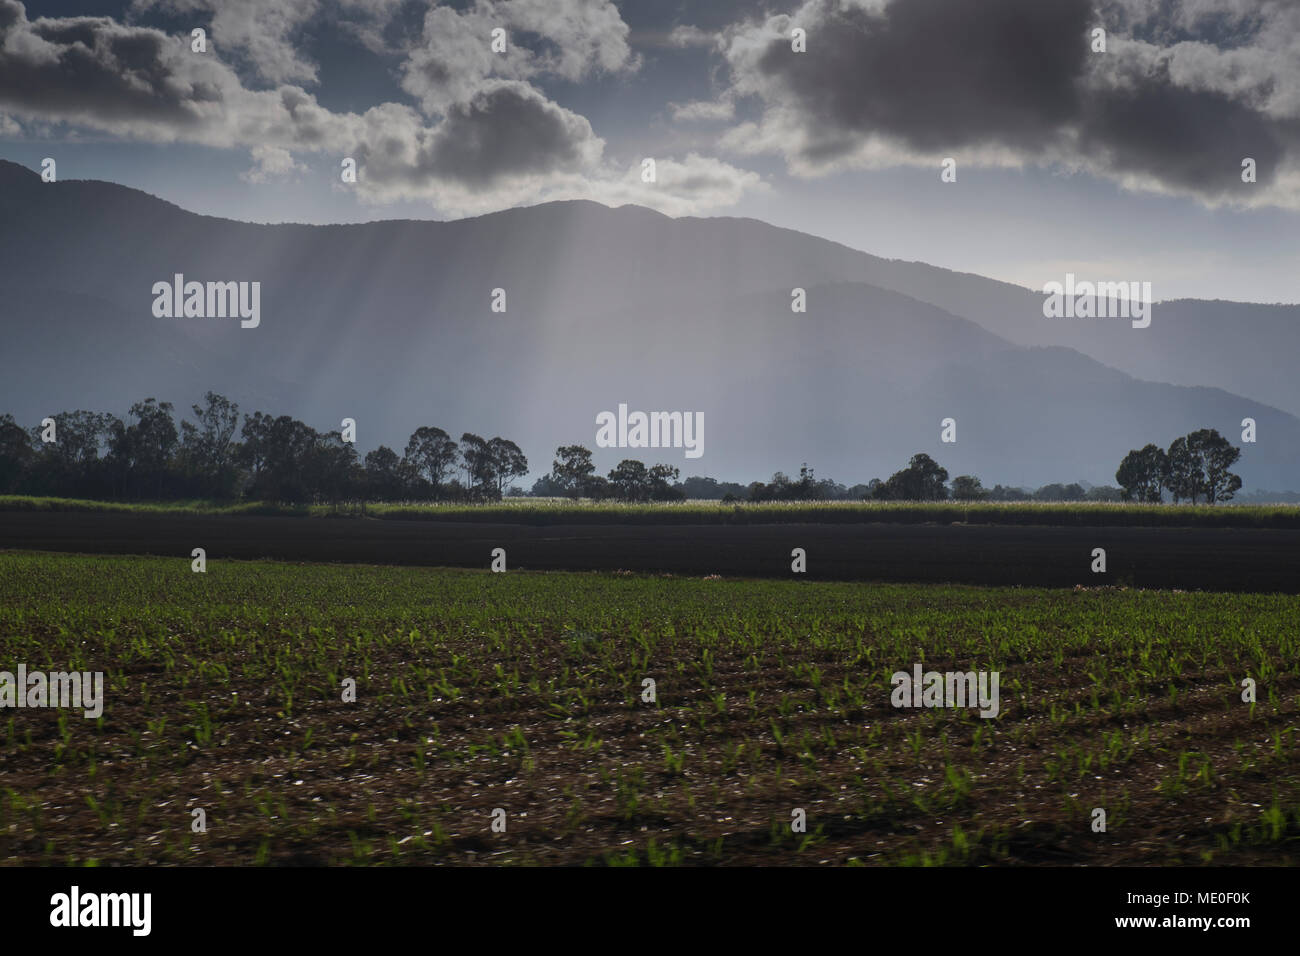 Newly planted crop in field and mountain range with crepuscular sunrays outside Cairns in Queensland, Australia Stock Photo